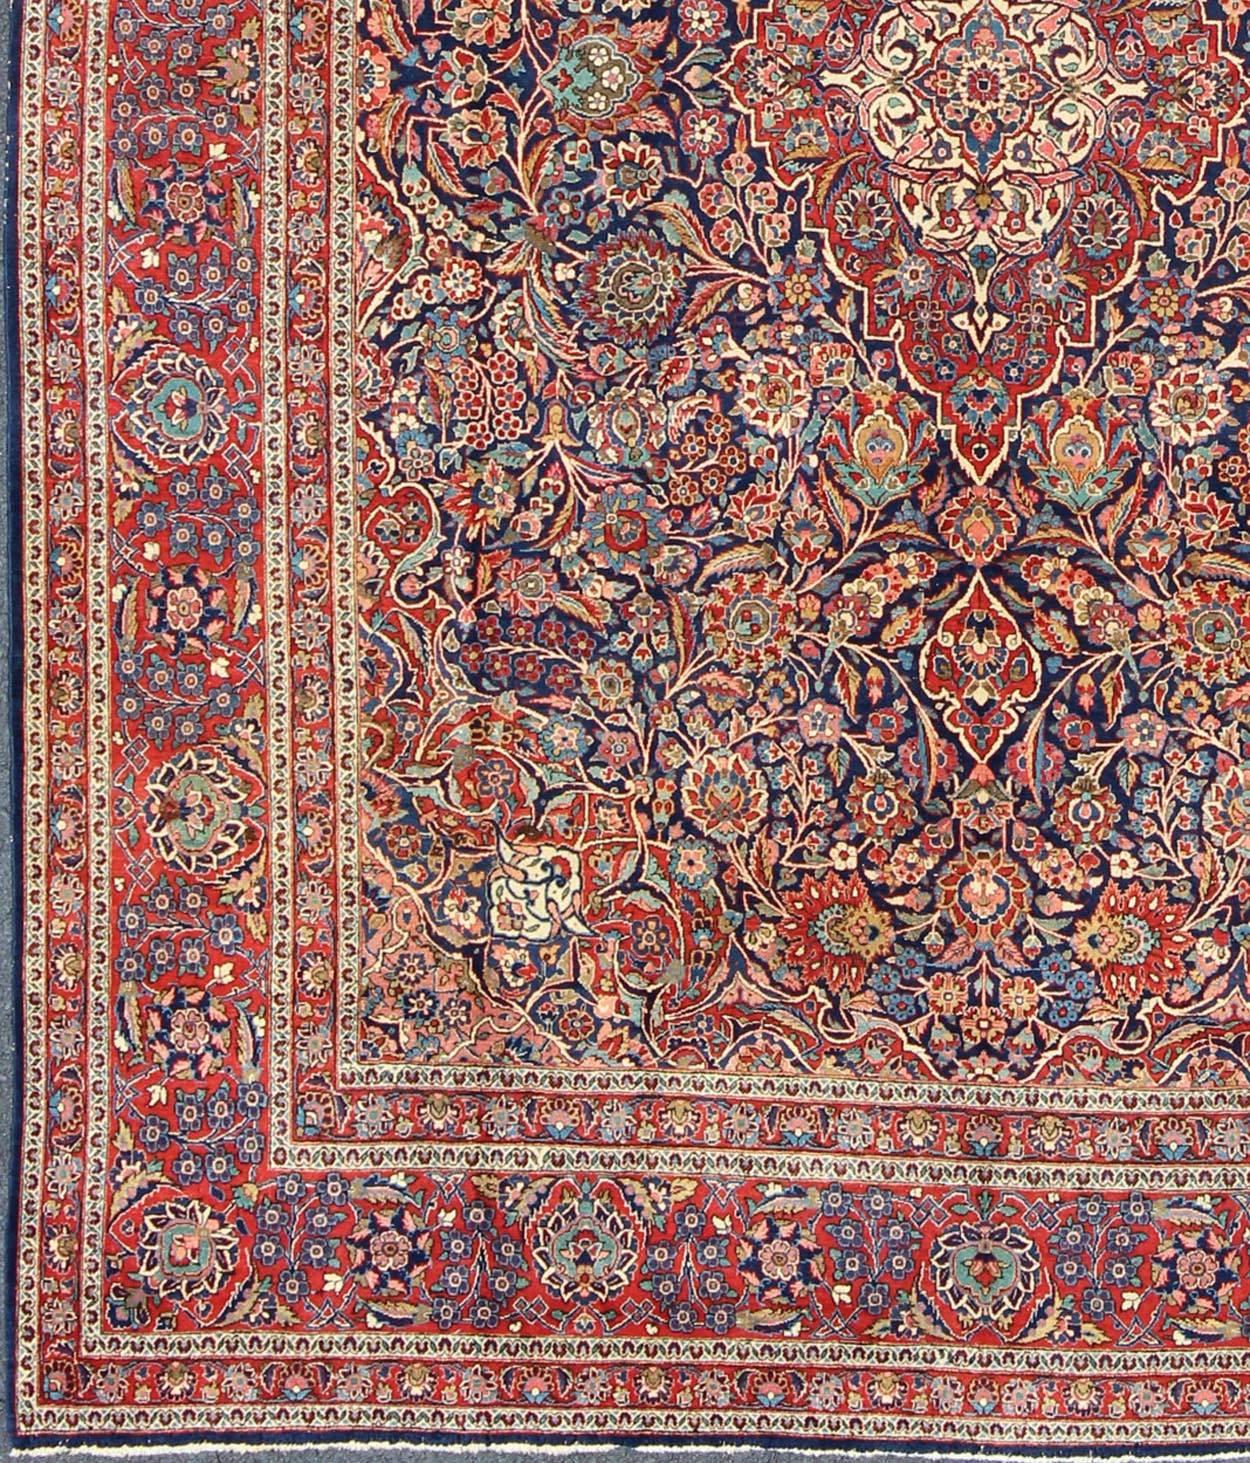 Fine Kashan Red and blue antique Persian Manchester wool Kashan rug with Arabesque blossom design, rug 11-90401, country of origin / type: Iran / Kashan, circa 1910
 Gorgeous antique rug (circa 1910). Madder red and indigo blue set the attractive